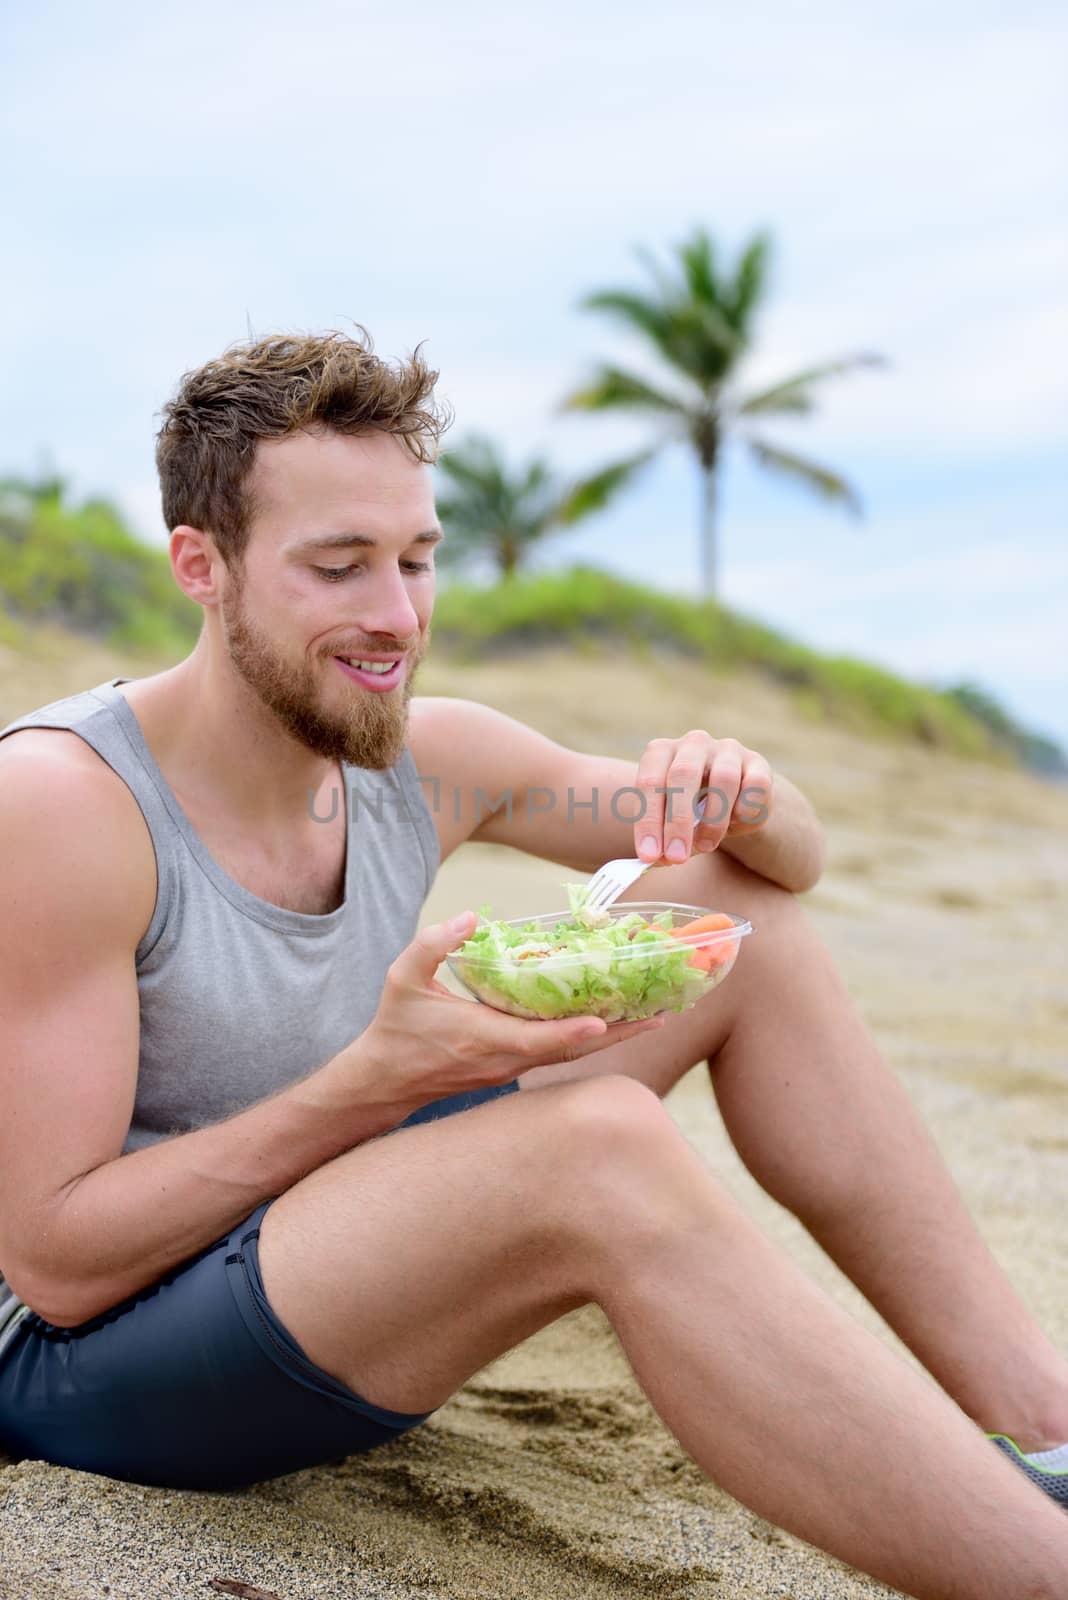 Healthy fit man on vegan diet eating organic food on beach. Muscular young fitness guy after exercise eating take-out food of prepared fresh salad and veggies.